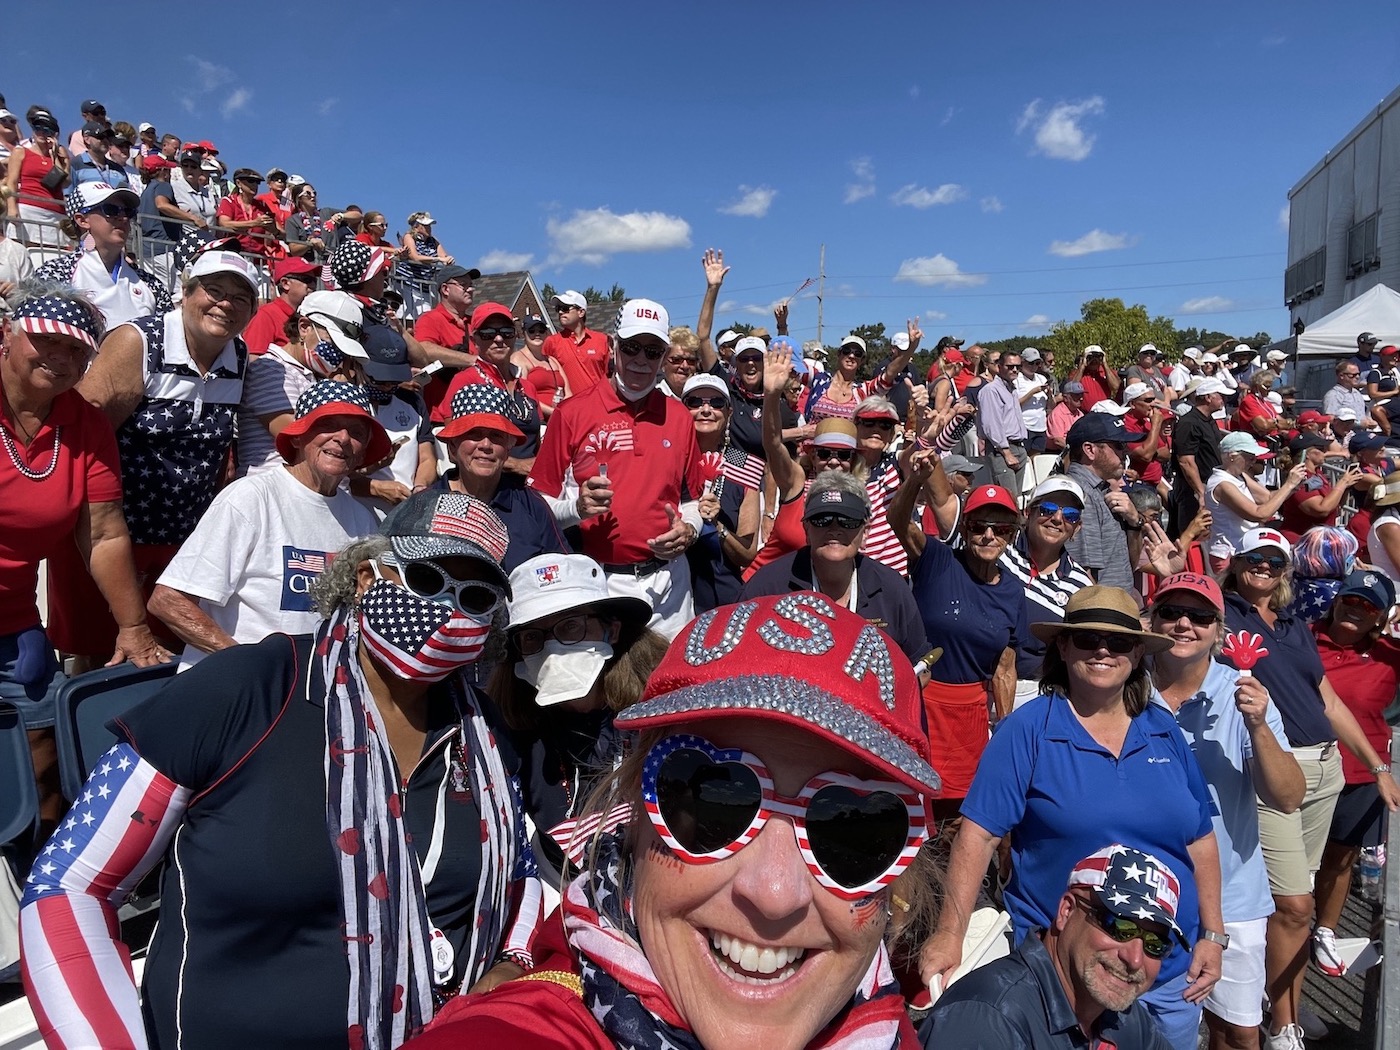 Debbie O'Connell with friends and fans at the Solheim Cup